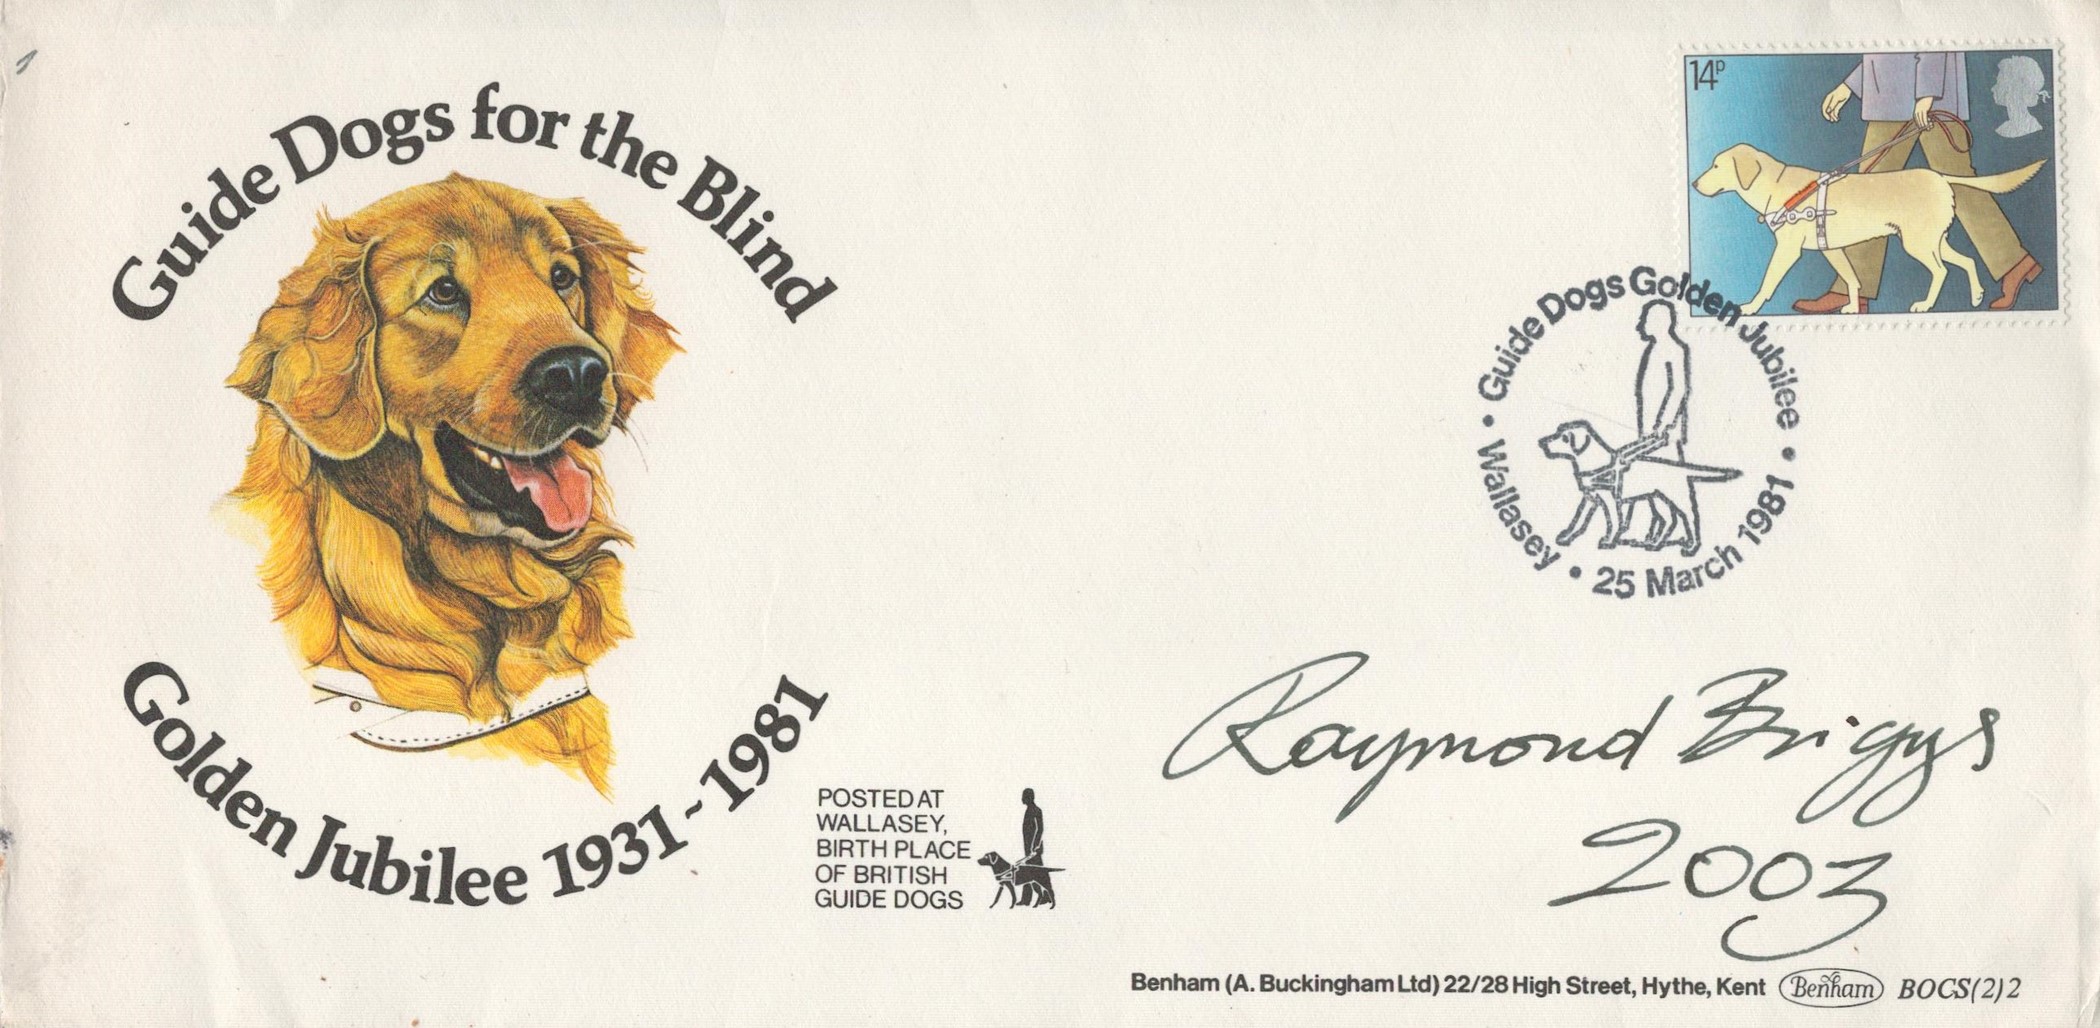 Raymond Briggs signed Guide dogs for the blind golden Jubilee 1931-1981 FDC. Stamp 25 March 1981.